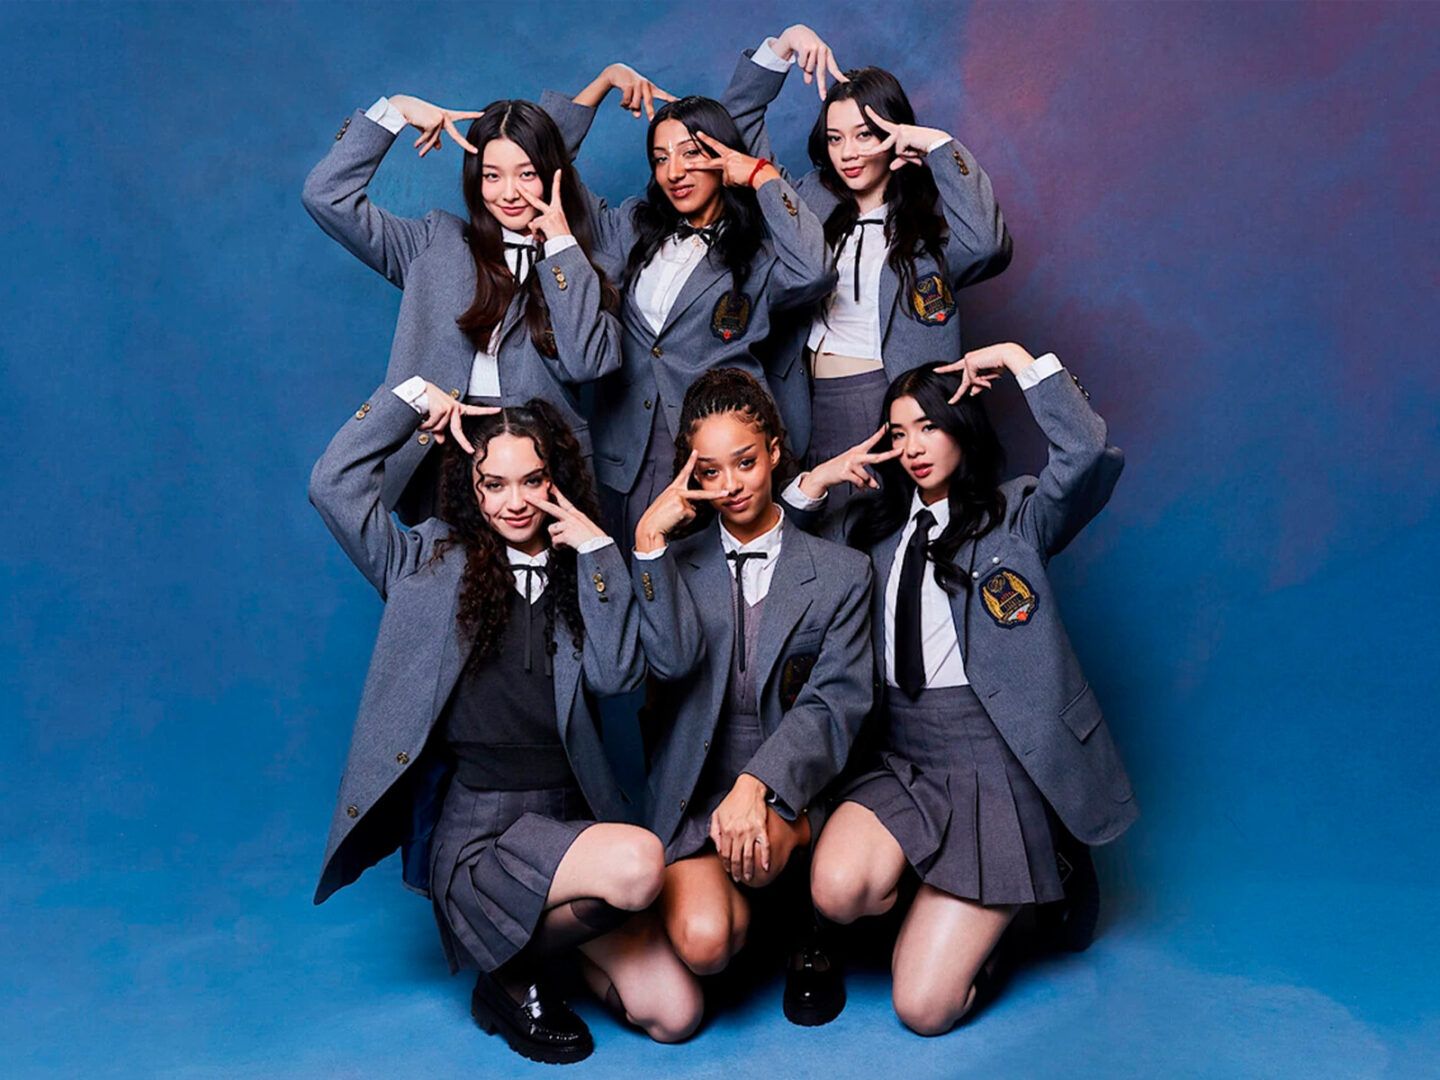 Katseye is the K-Pop group presented by HYBE and Geffen Records